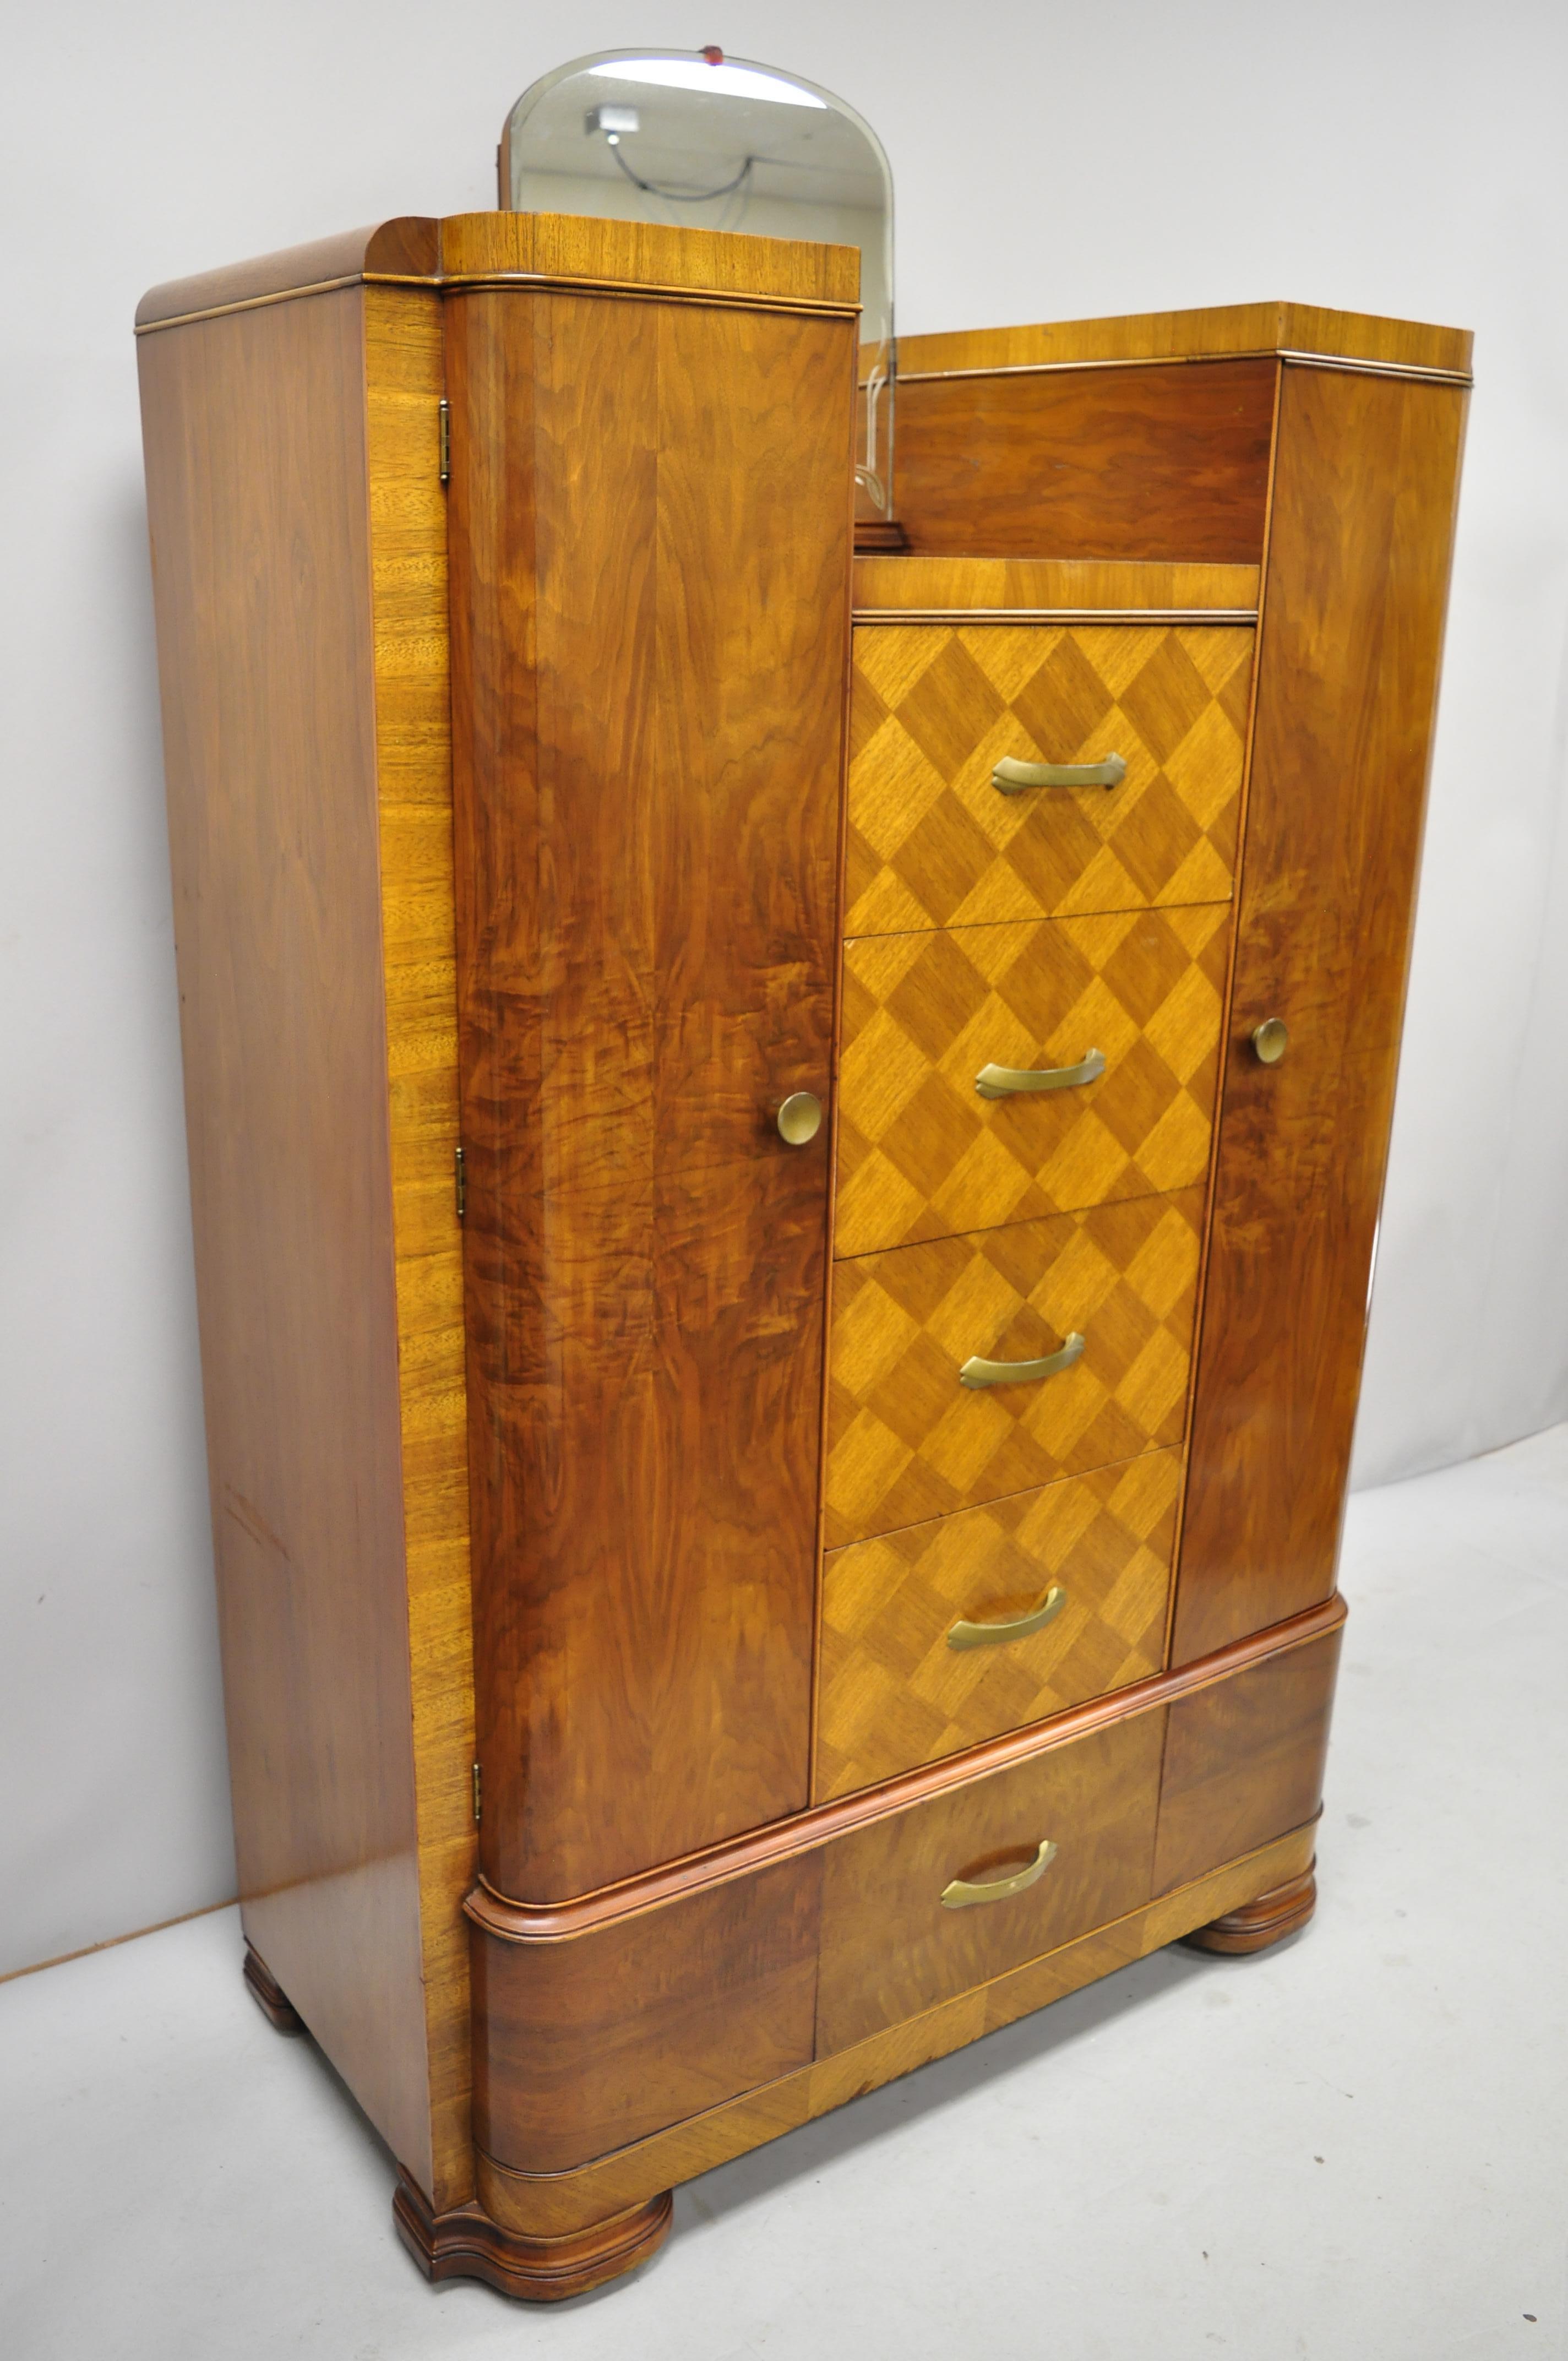 Art Deco Waterfall chest dresser armoire wardrobe cedar chest with mirror by tri-bond. Item includes cedar lined cabinets, etched mirror, beautiful wood grain, 2 swing doors, 5 dovetailed drawers, very nice antique item, circa early 20th century.